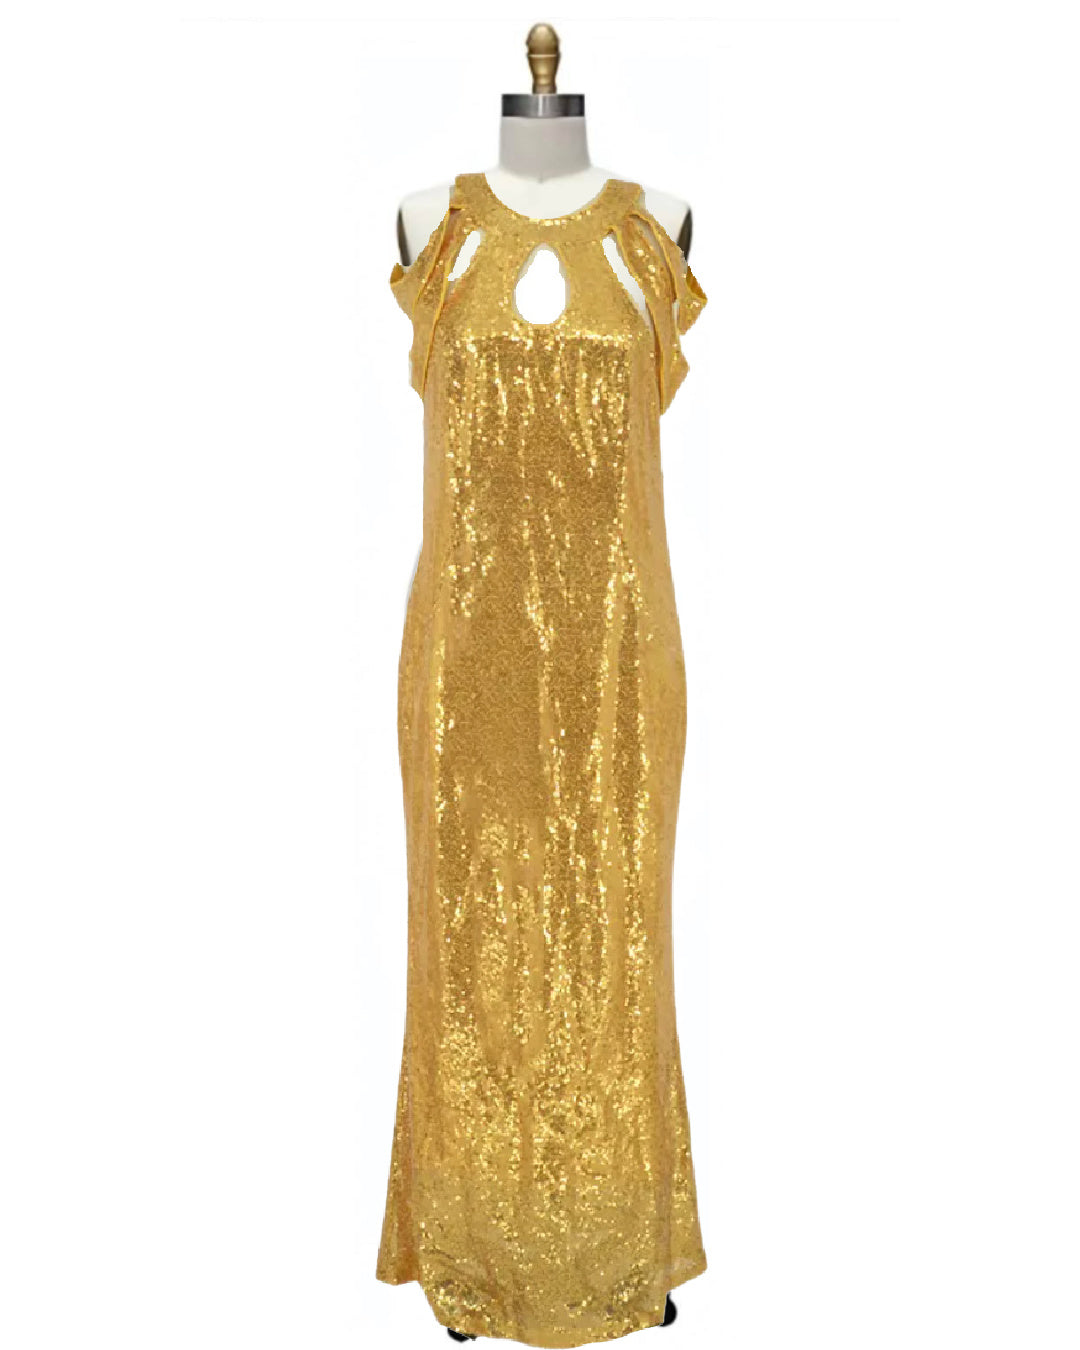 Gold Digger- the 1930s Inspired Gold Sequined Off Shoulder Evening Dress Plus Size